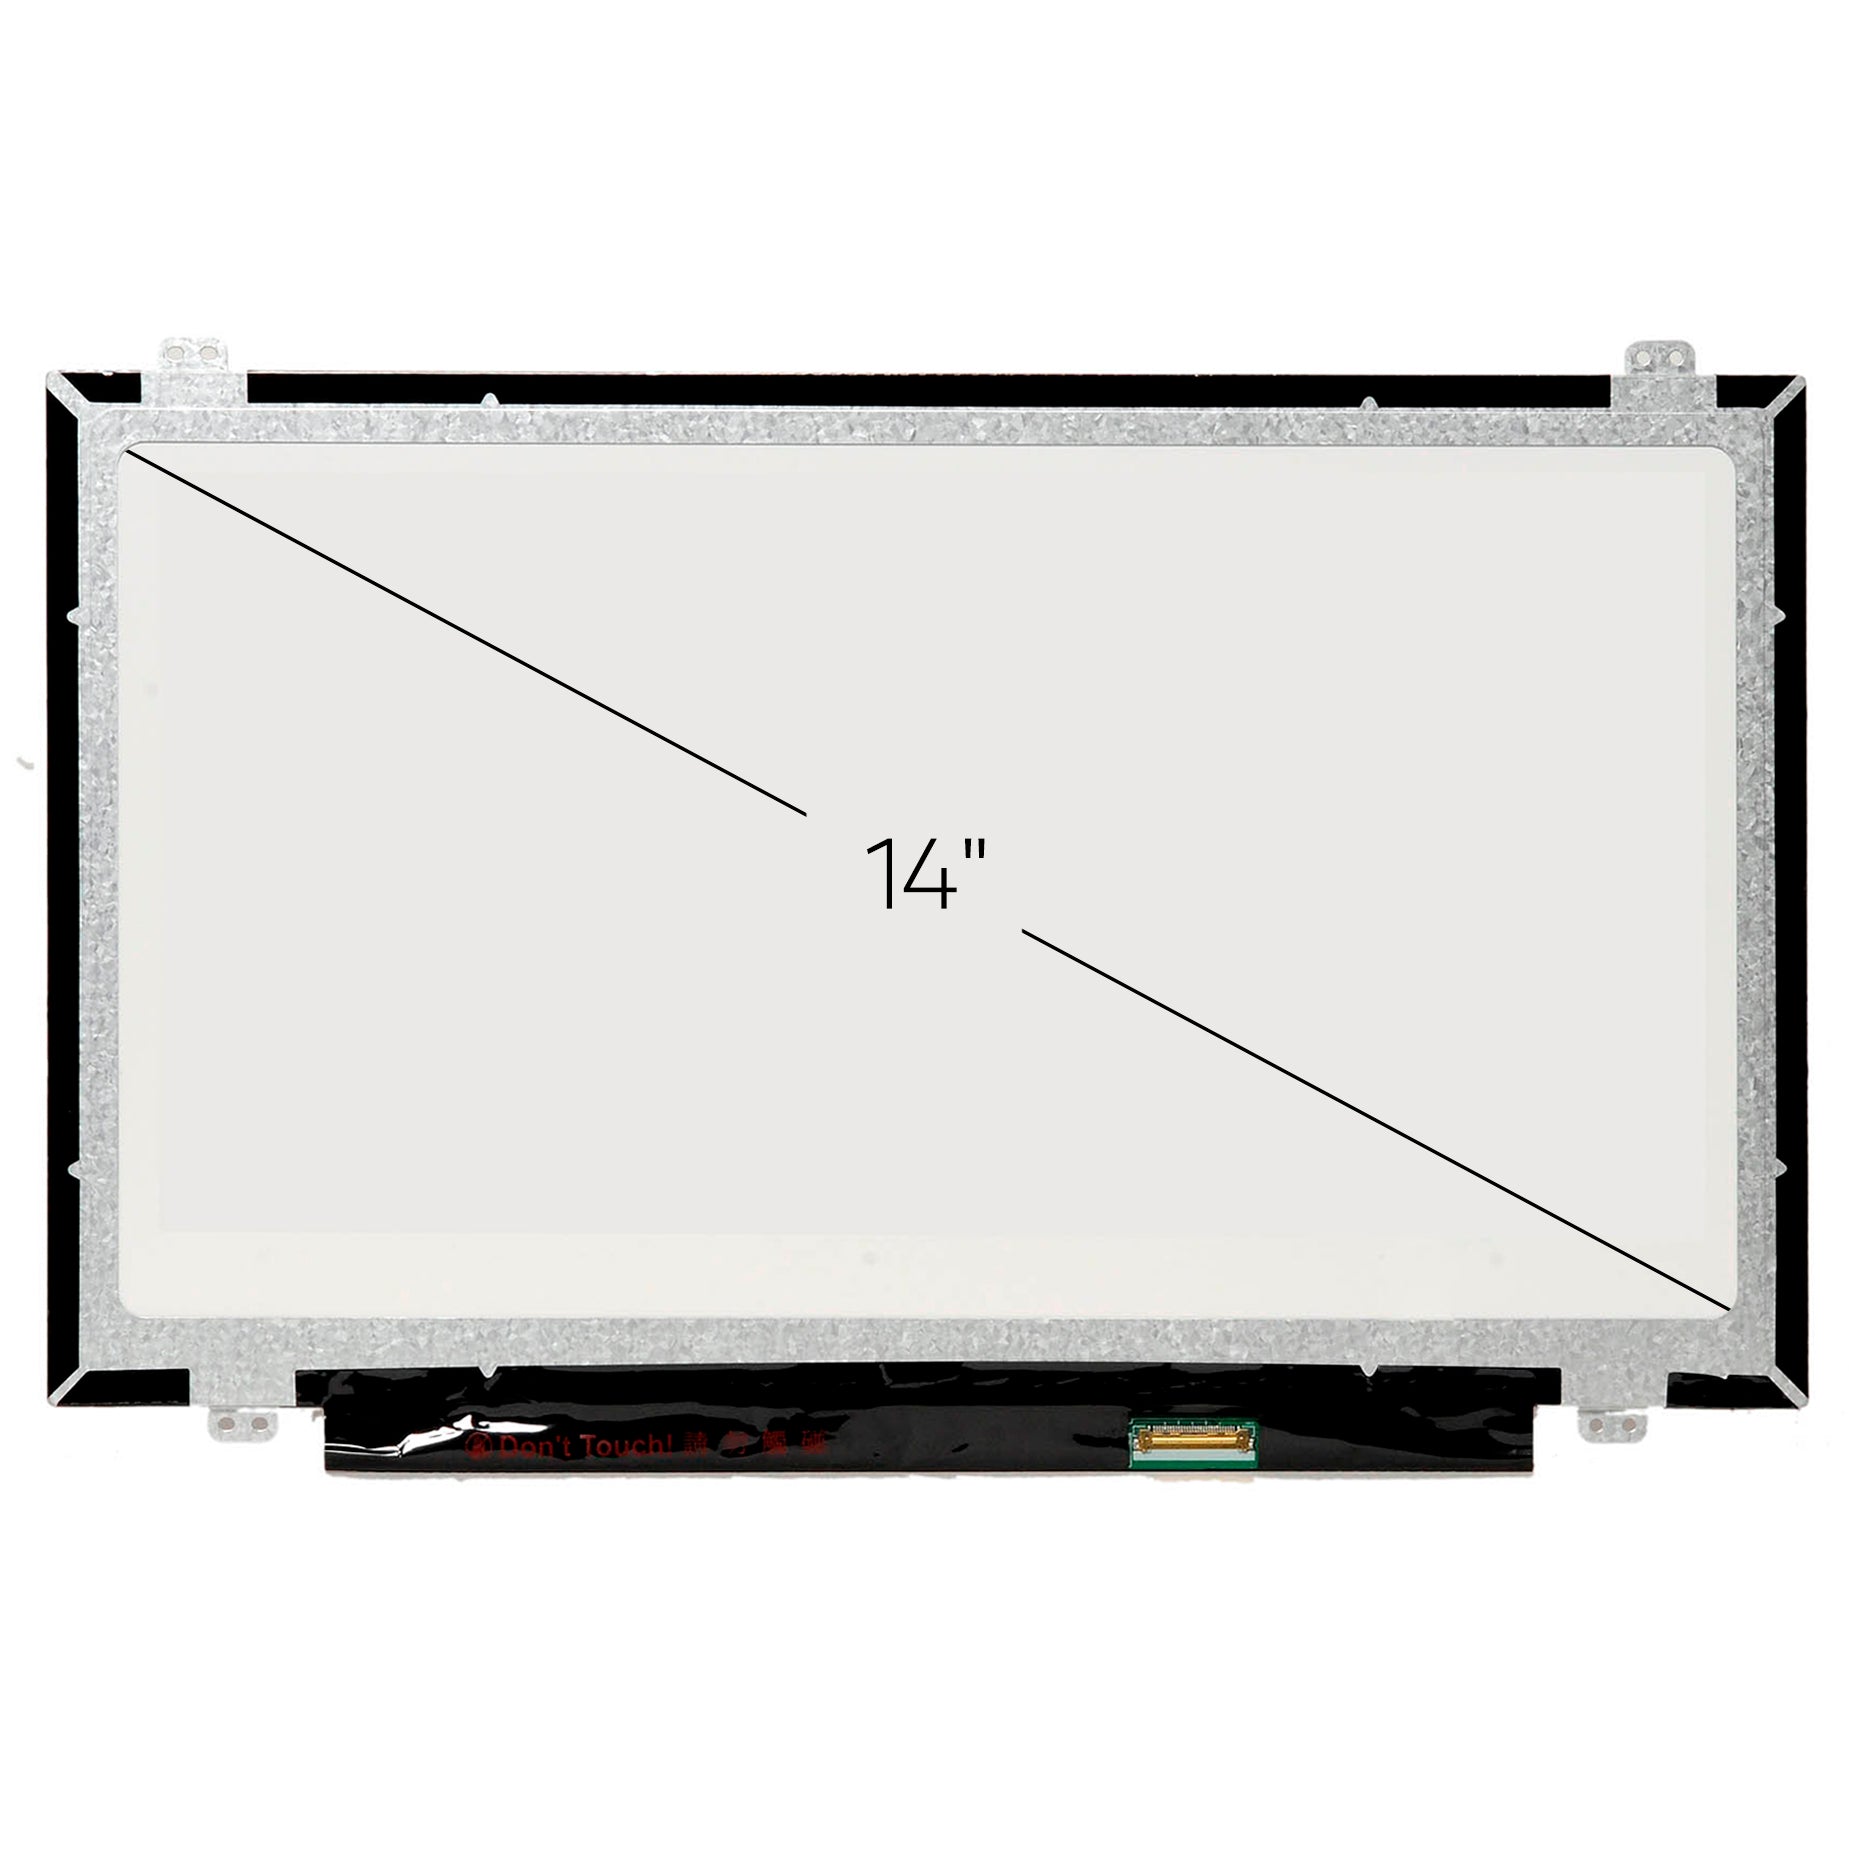 Screen Replacement for Acer Aspire A114-31 HD 1366x768 Glossy LCD LED Display